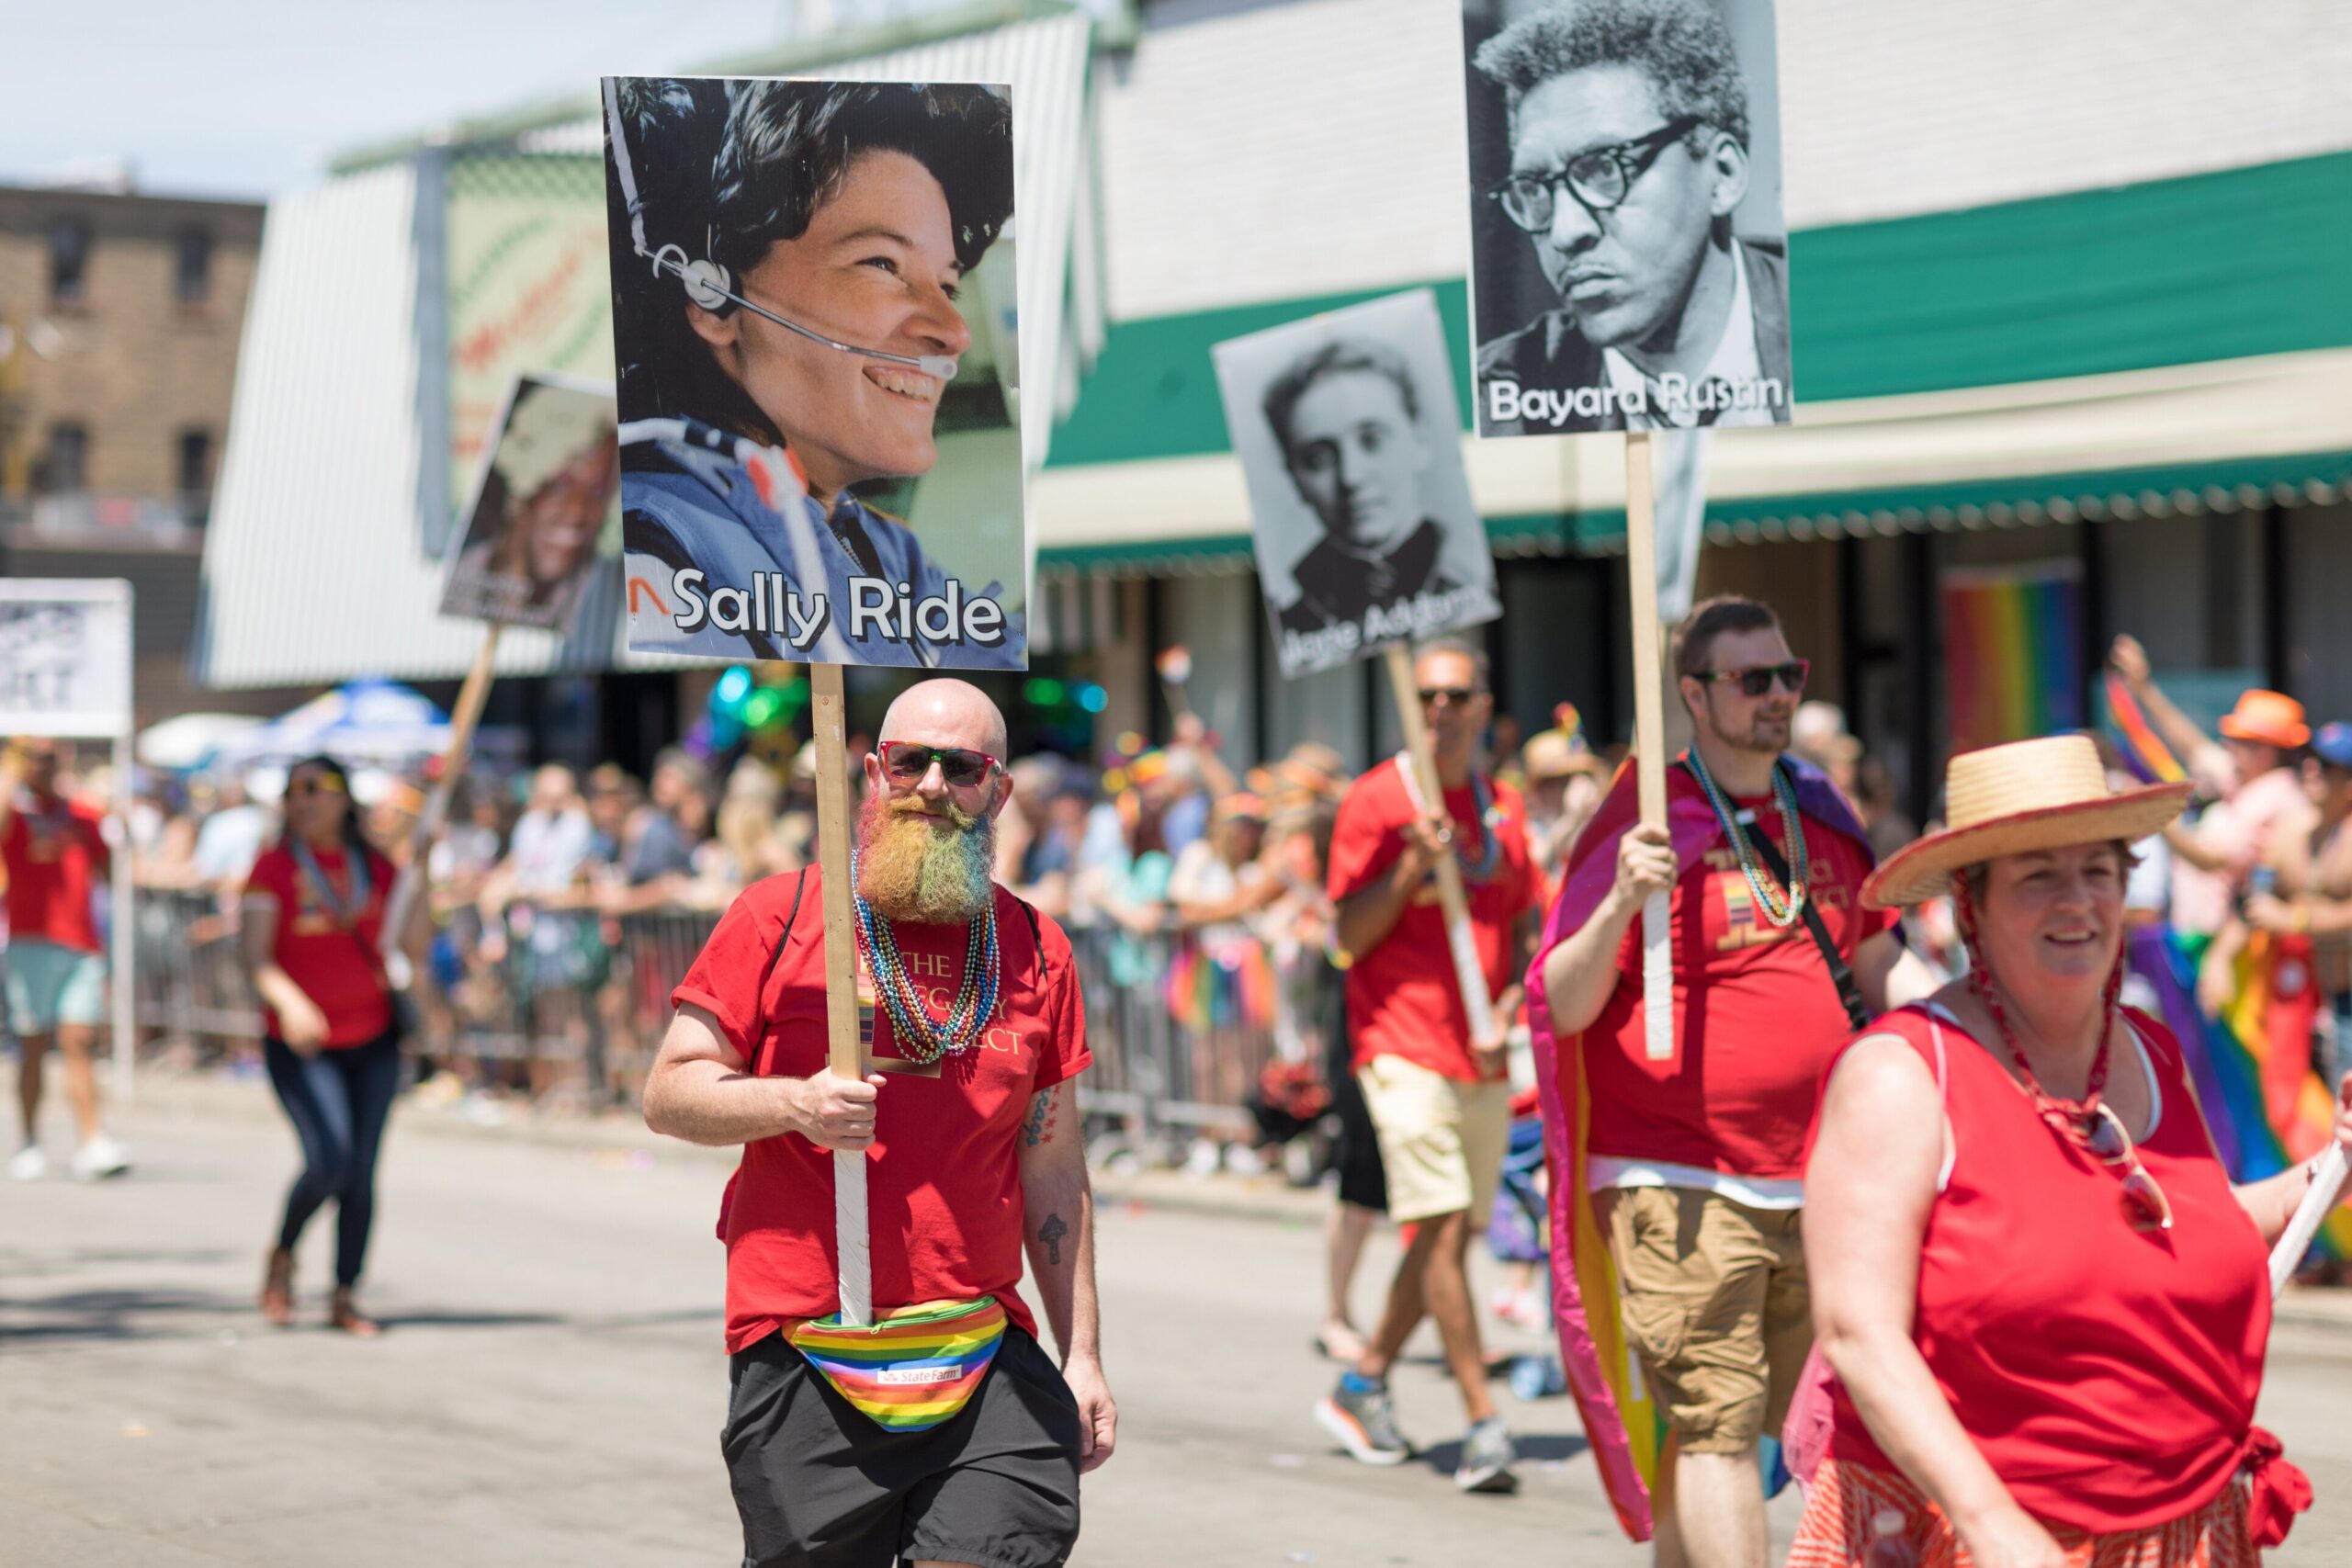 Chicago, Illinois, USA - June 24, 2018 People carrying signs with photos of important gay, lesbian historical characters, Sally Ride, Bayard Rustin, during the LGBTQ Pride Parade in Chicago